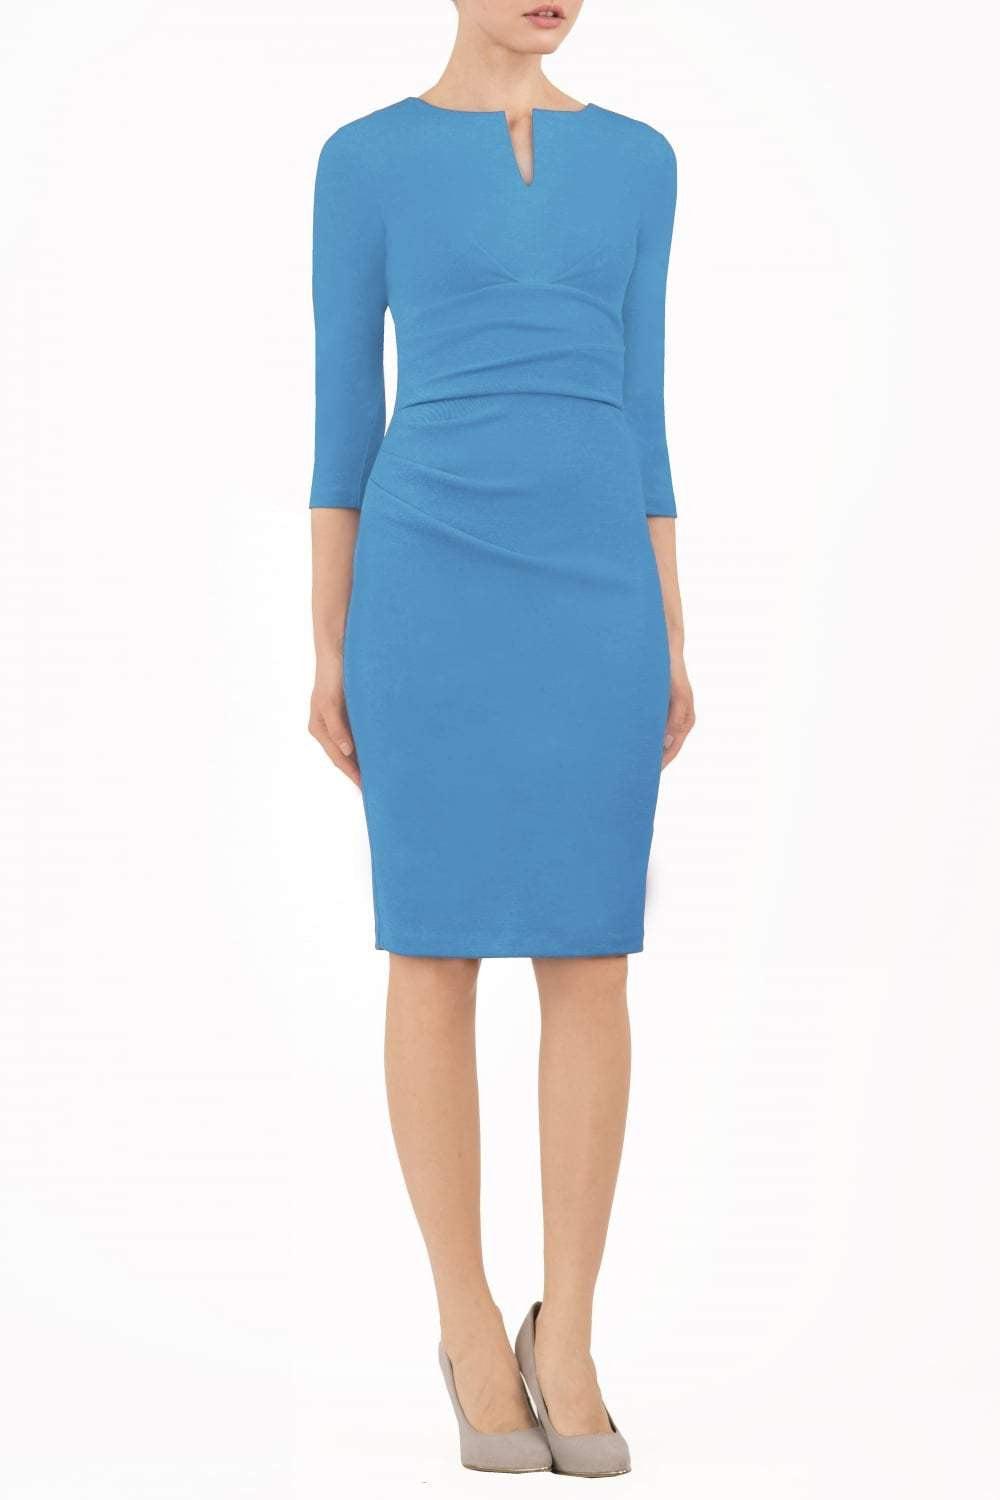 model wearing diva catwalk donna pencil dress in colour malibu blue with wide band and sleeves and rounded neckline with low split in front